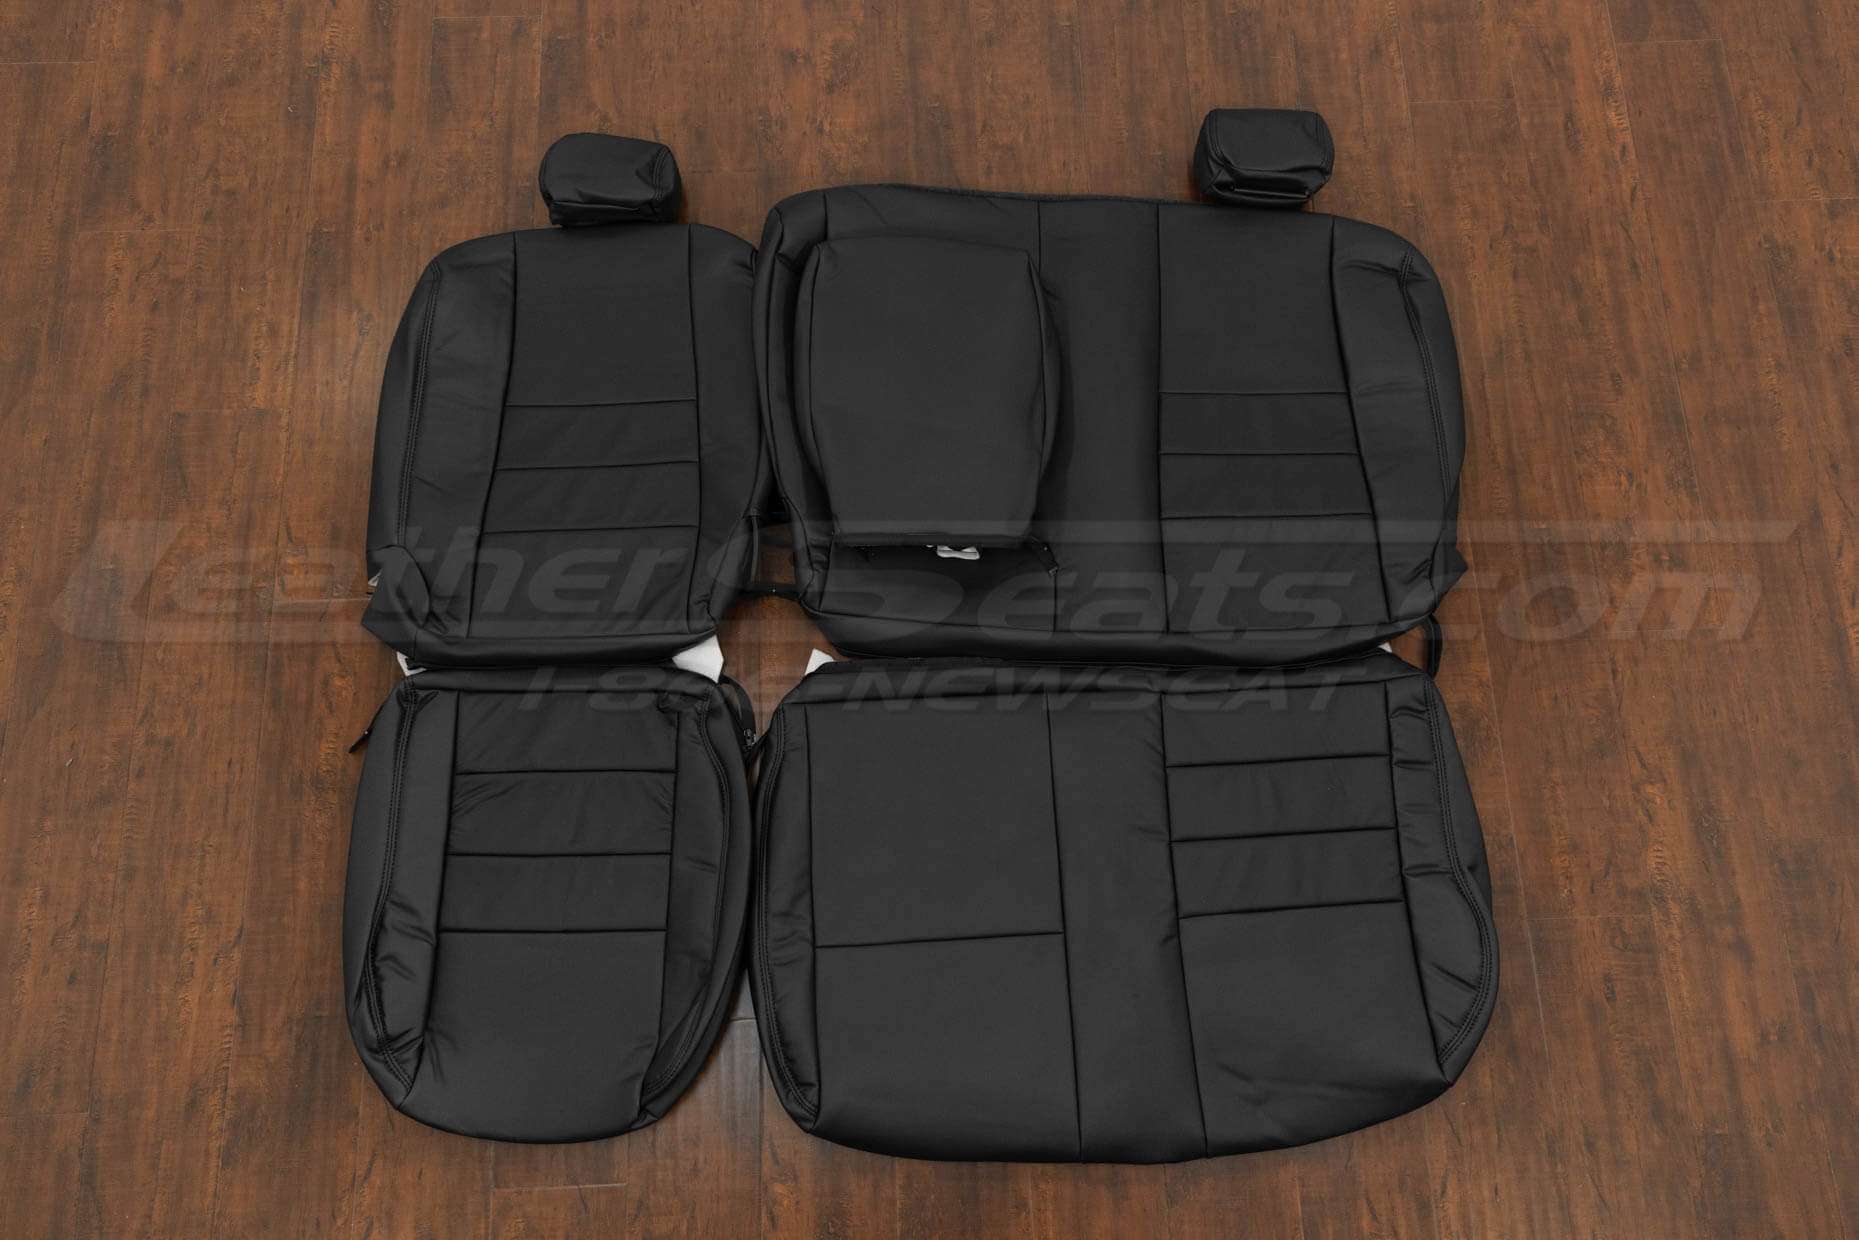 Ford F350 Crew Cab Leather Seat Kit - Black - Rear seat upholstery w/ armrest